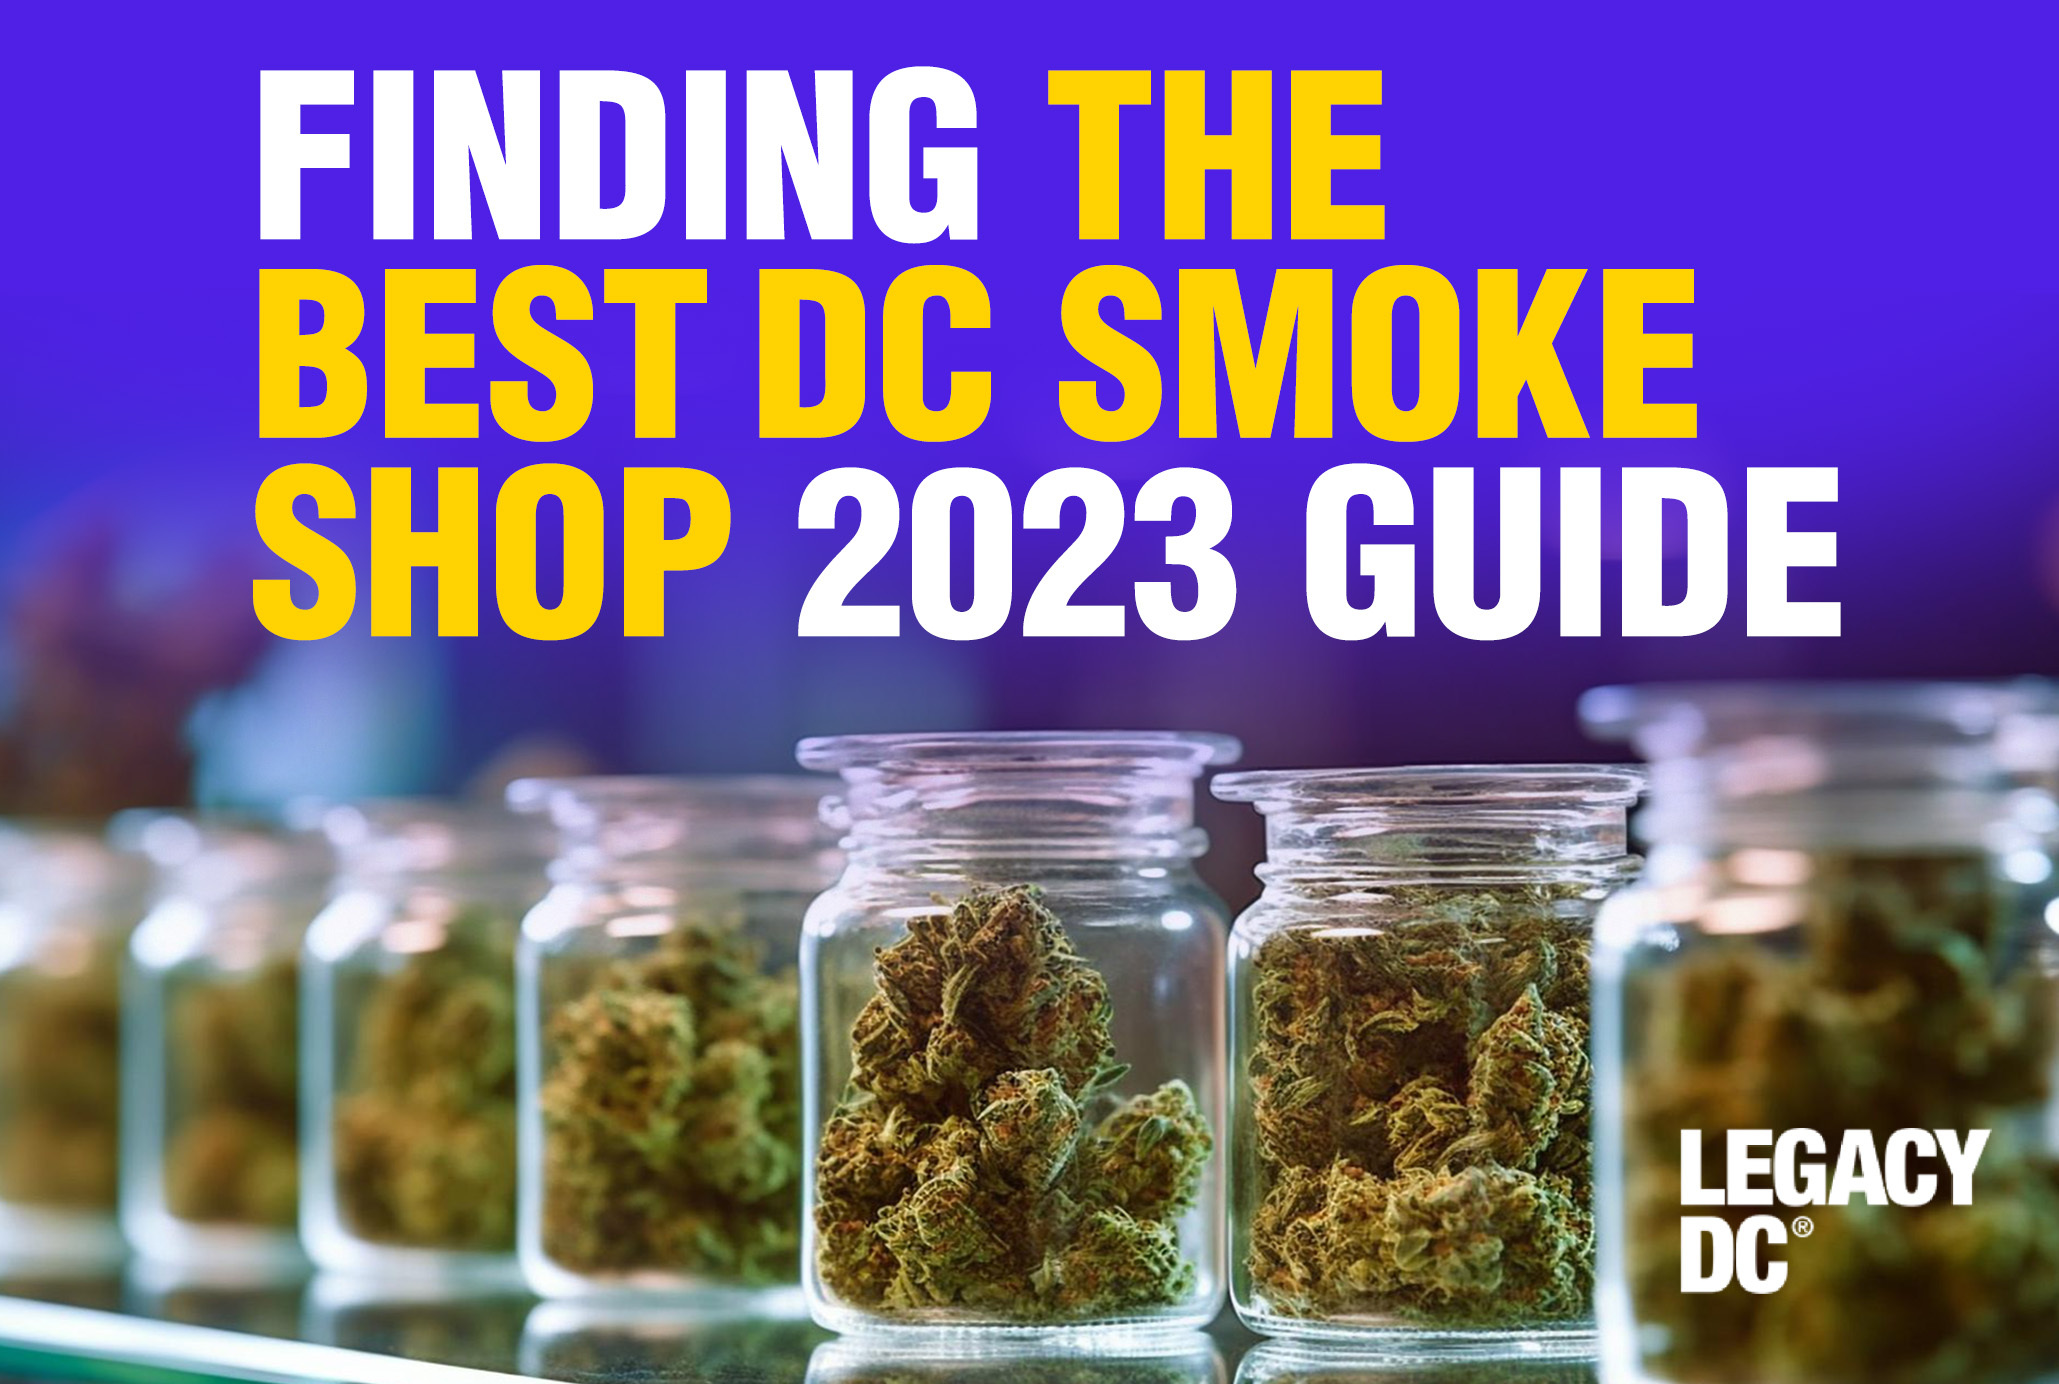 Finding the best dc smoke shop 2023 guide